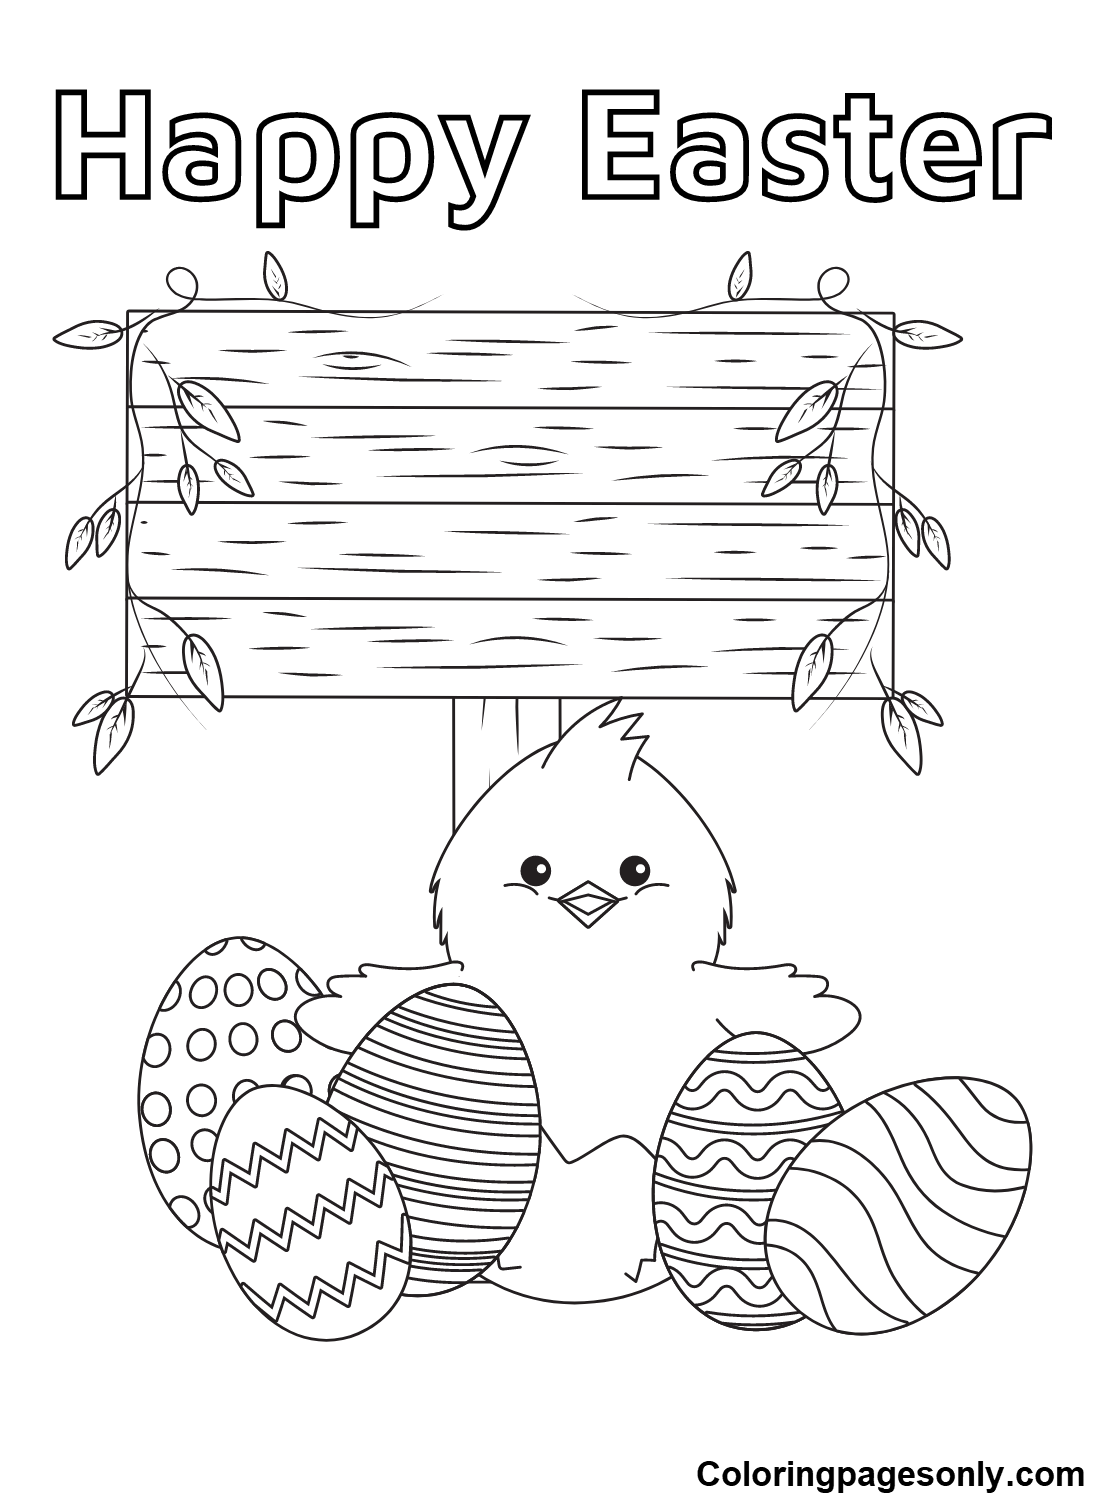 Happy Easter with Chick Coloring Page